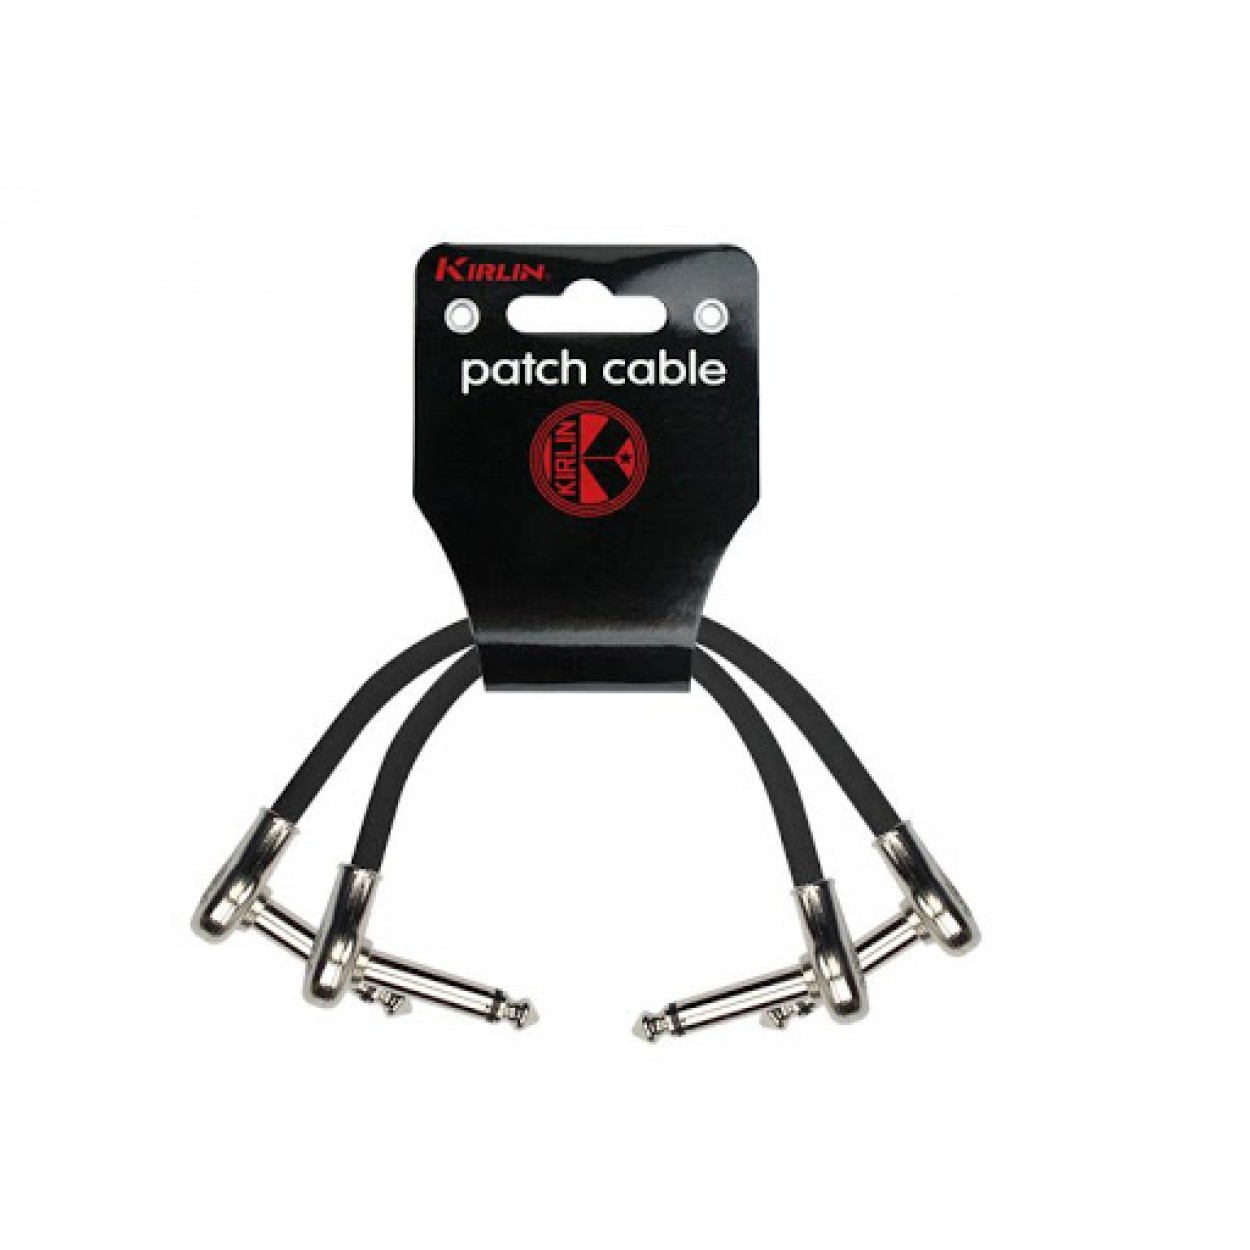 Kirlin 6" Patch Cable 2 Pack